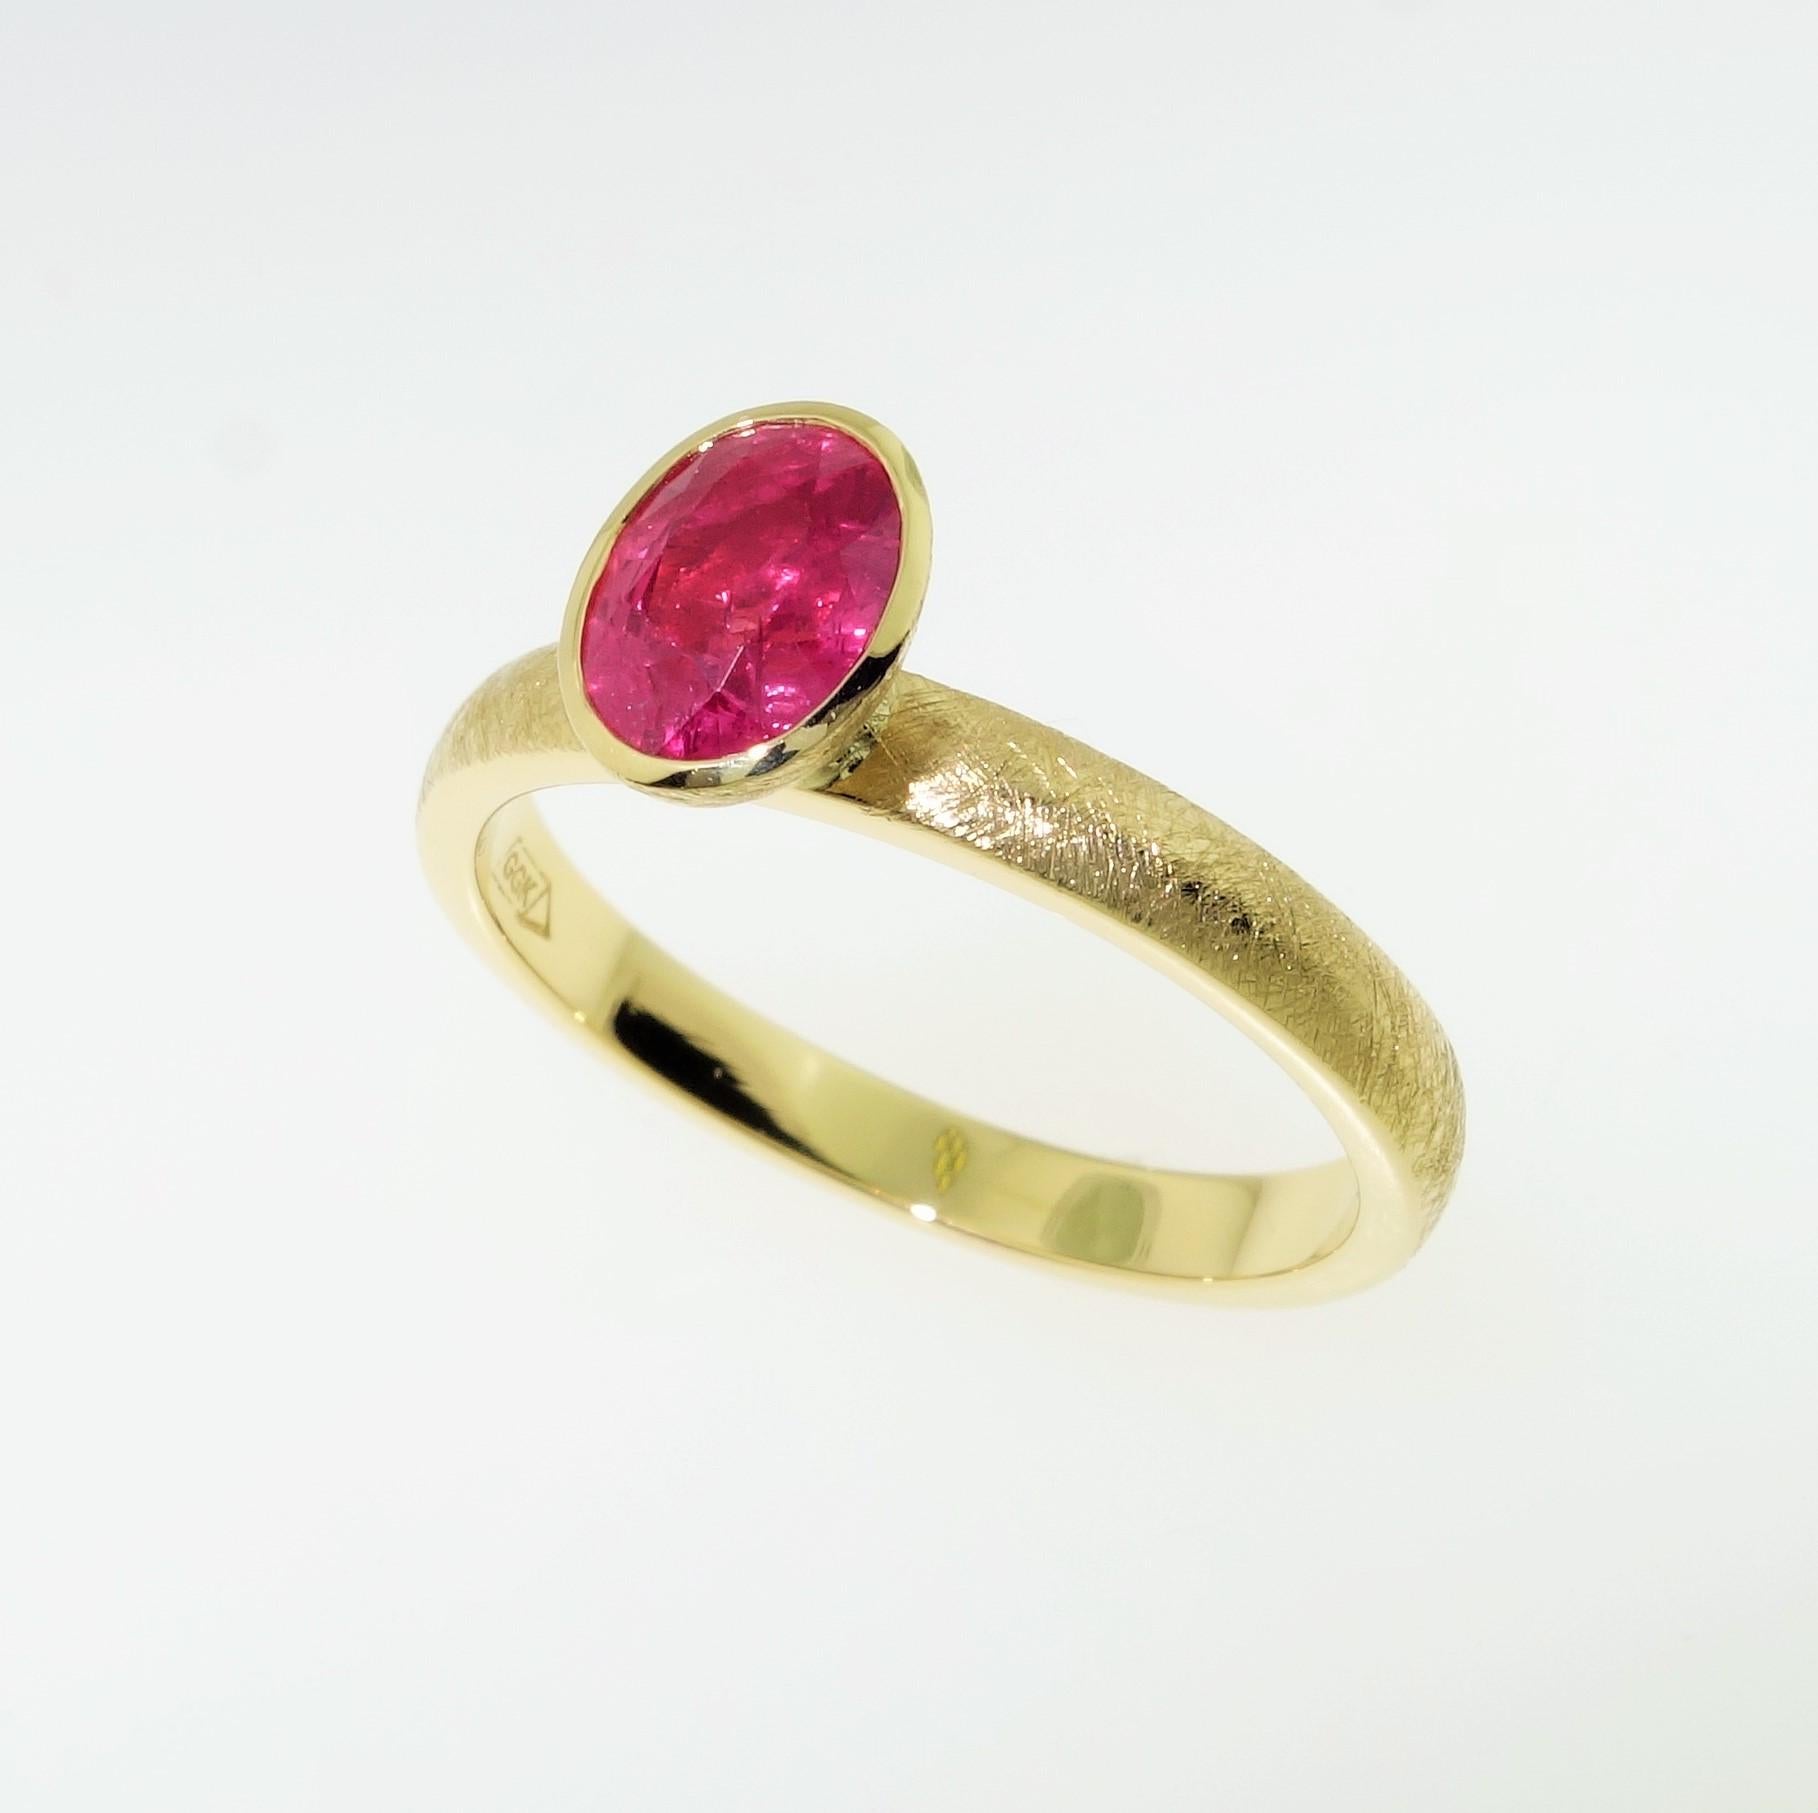 Simply Beautiful, Elegant and finely detailed Stacking Ring, set with an oval Pink Sapphire, weighing approx. 1.14 Carats and measuring 7mm x 5.2mm. Hand crafted and Hand Textured in 18 Karat Yellow Gold. The ring epitomizes vintage charm, taking